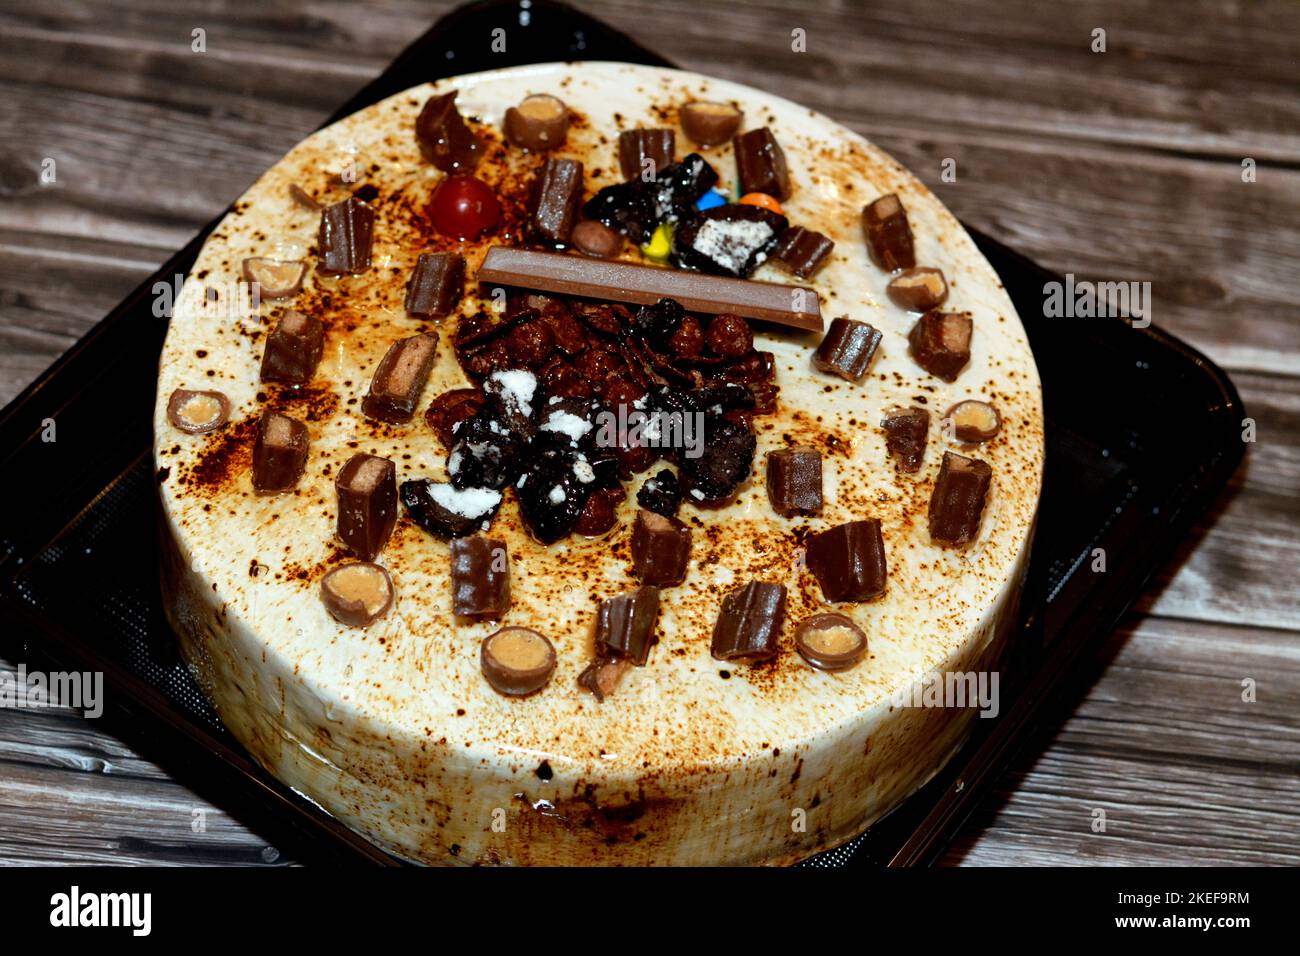 Caramel chocolate festive cake covered with caramel and whipped cream, stuffed with vanilla cream and nuts, and decorated with different types of choc Stock Photo